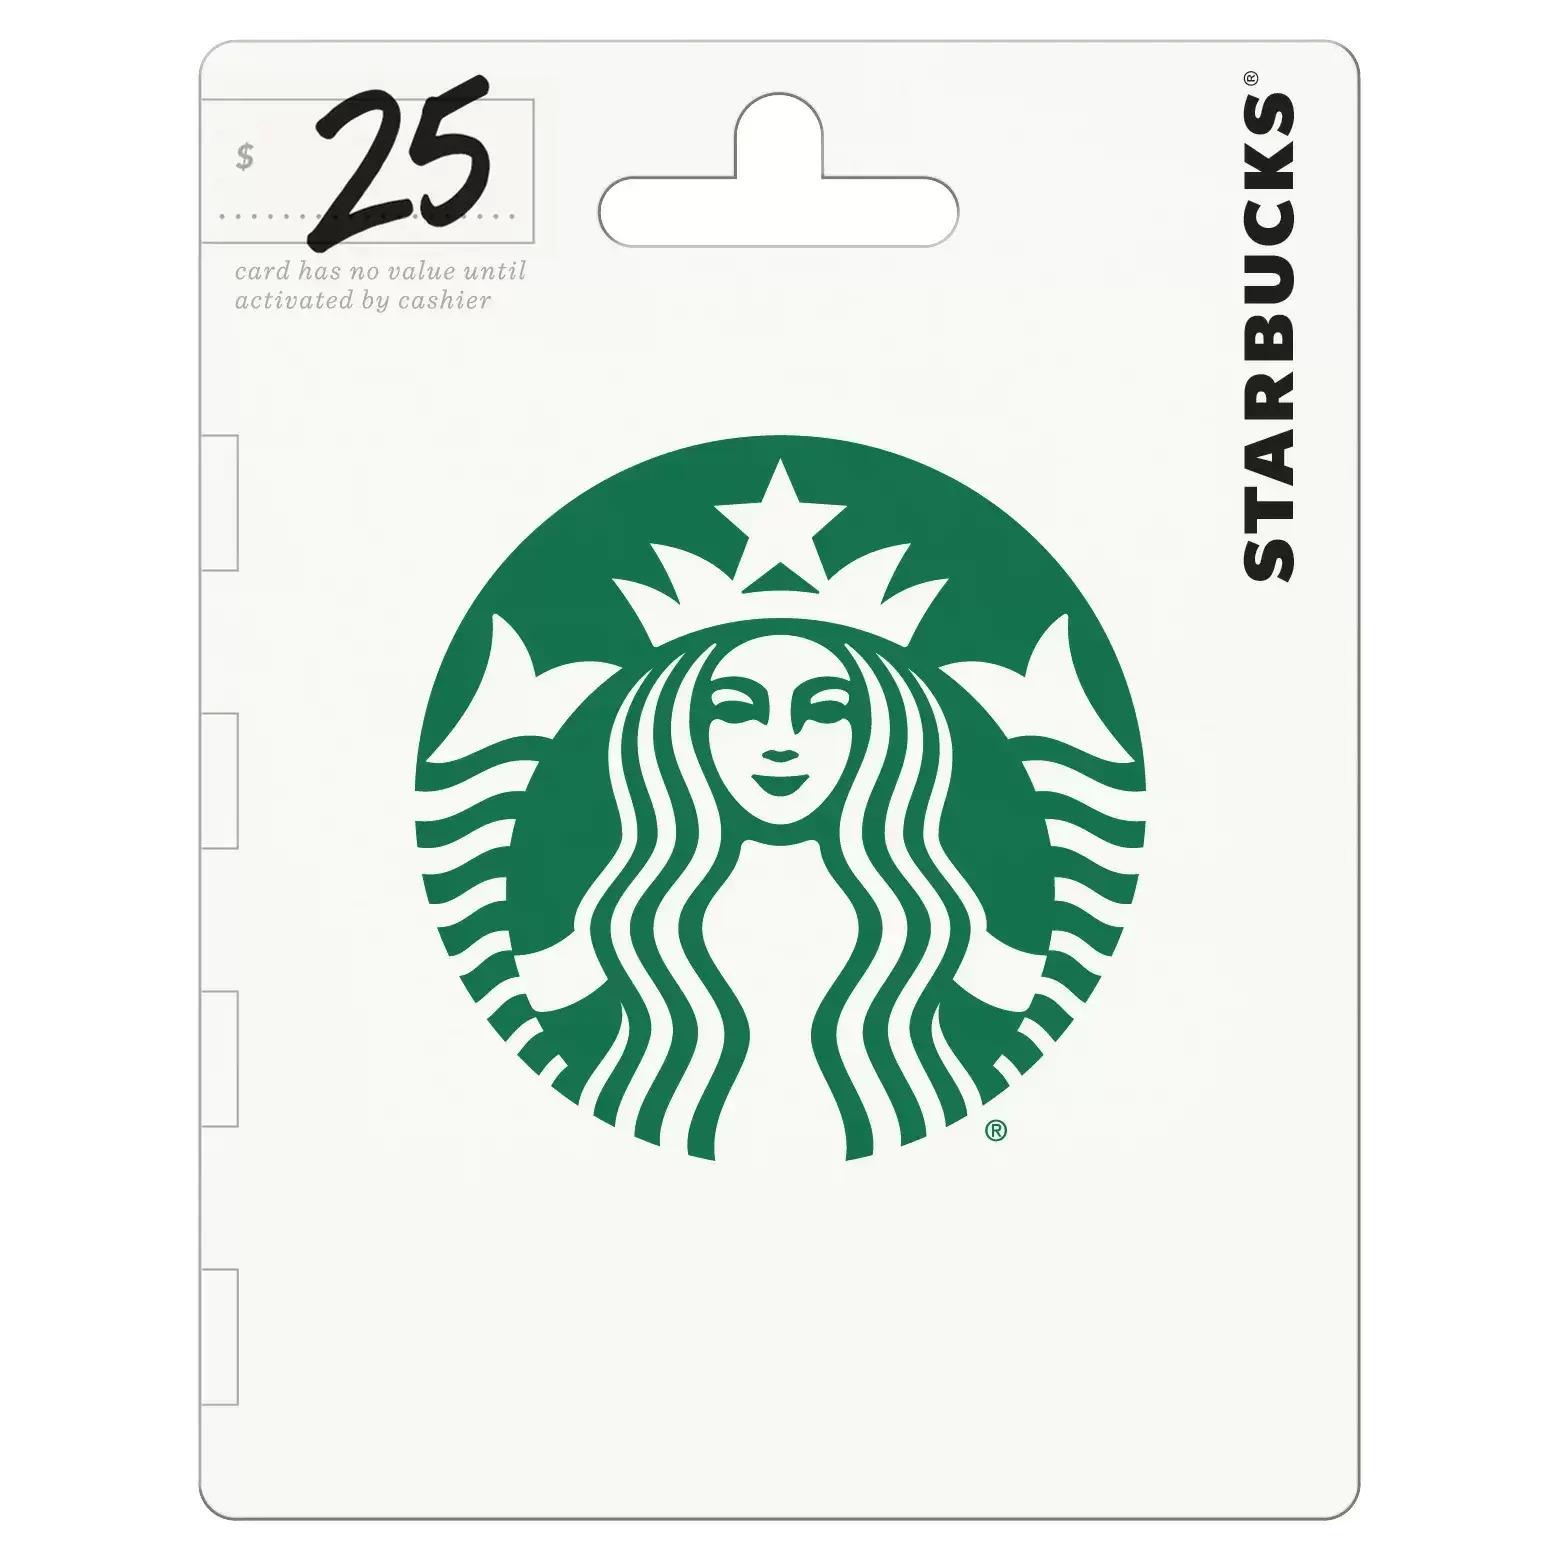 Starbucks Discounted Gift Card 9% Off